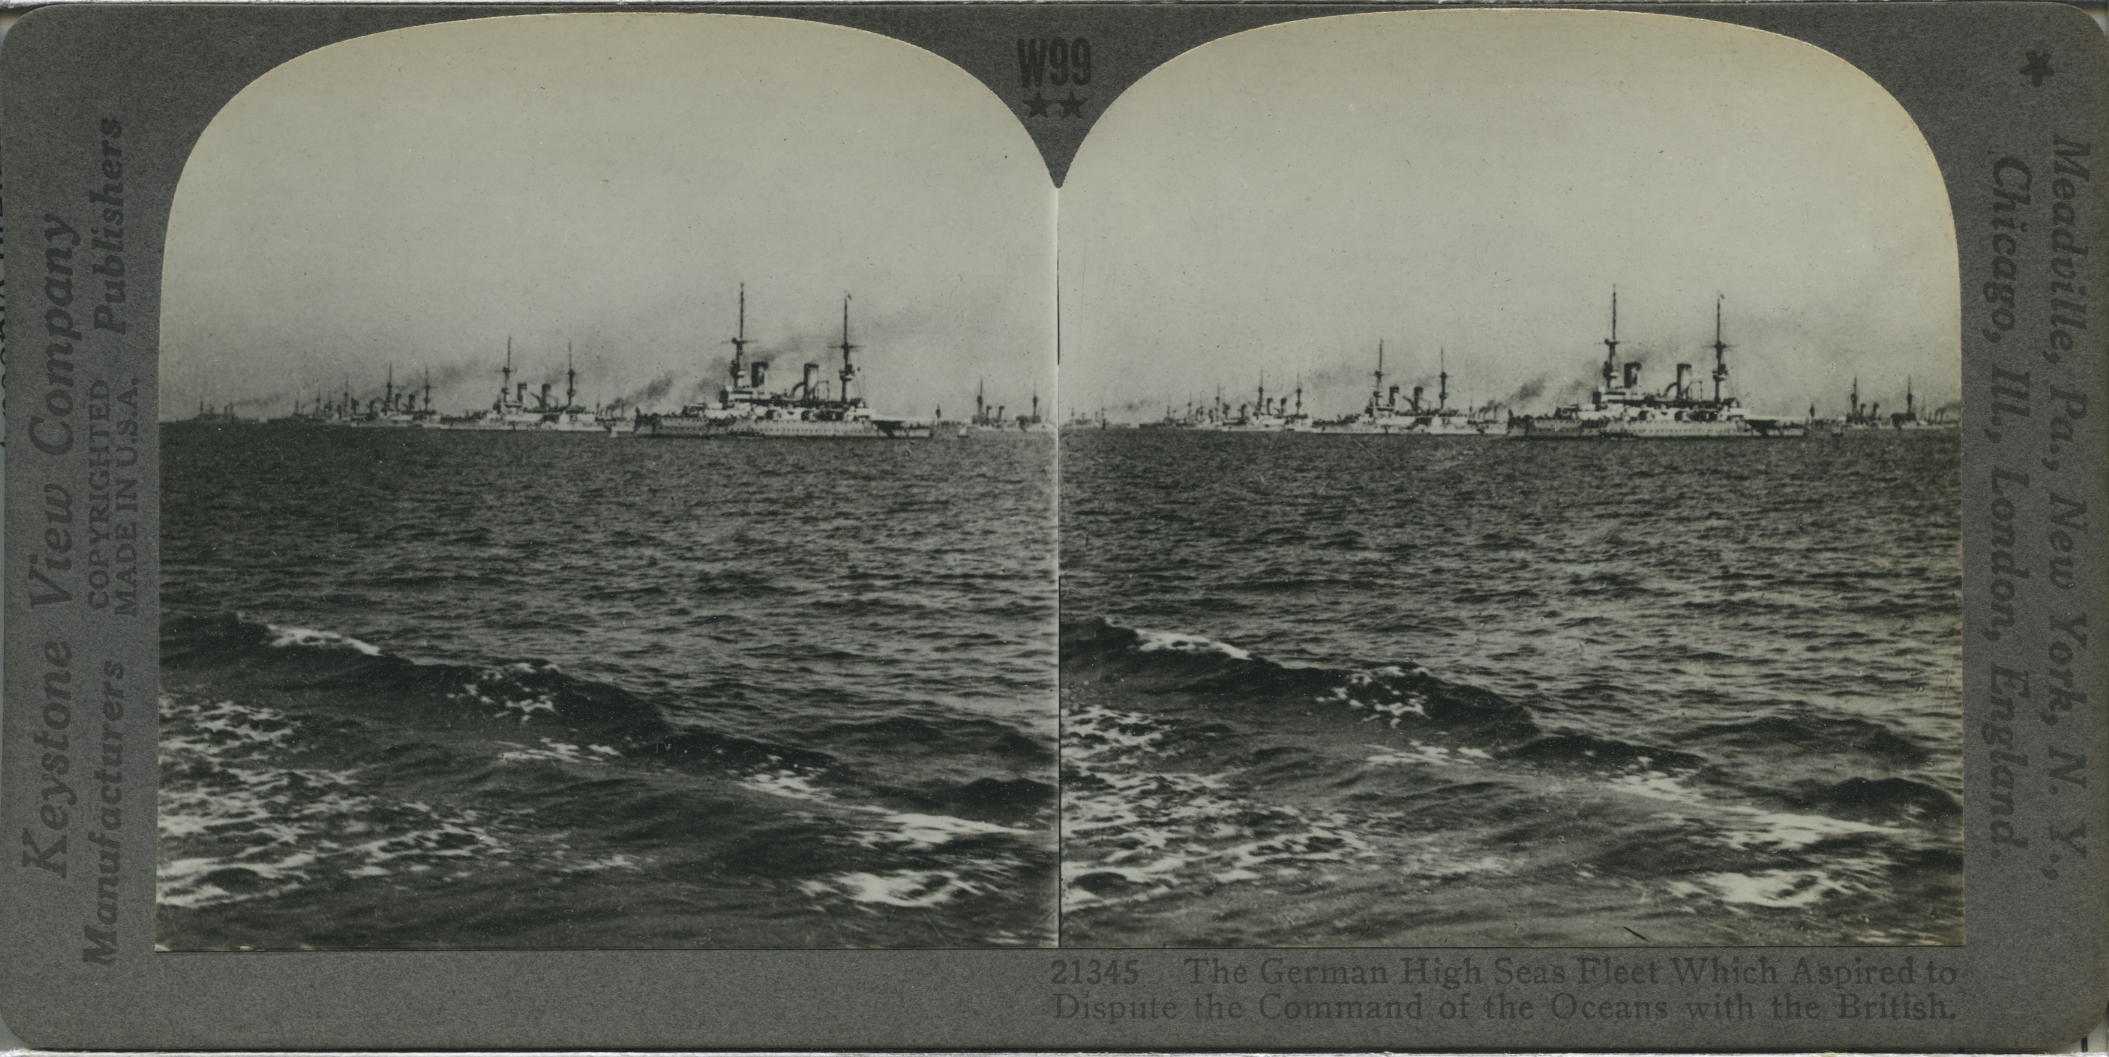 The German High Seas Fleet Which Aspired to Dispute the Command of the Oceans with the British